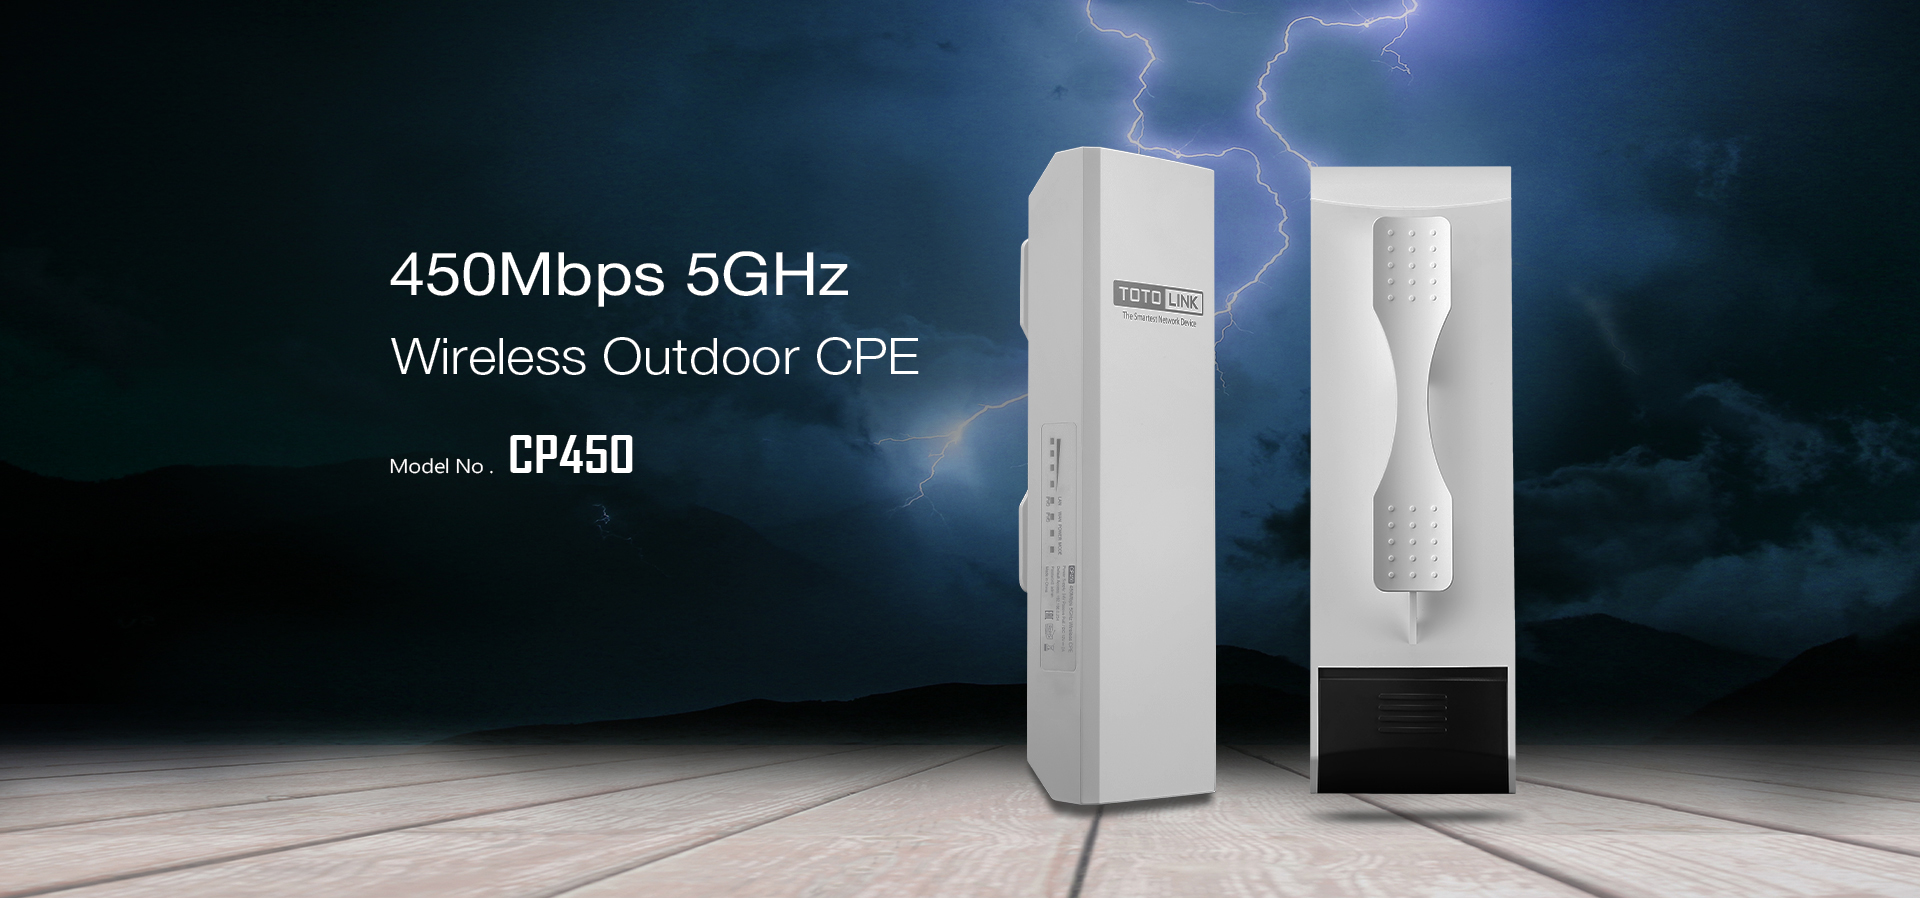 CP450-450Mbps-5GHz-Wireless-Outdoor-CPE